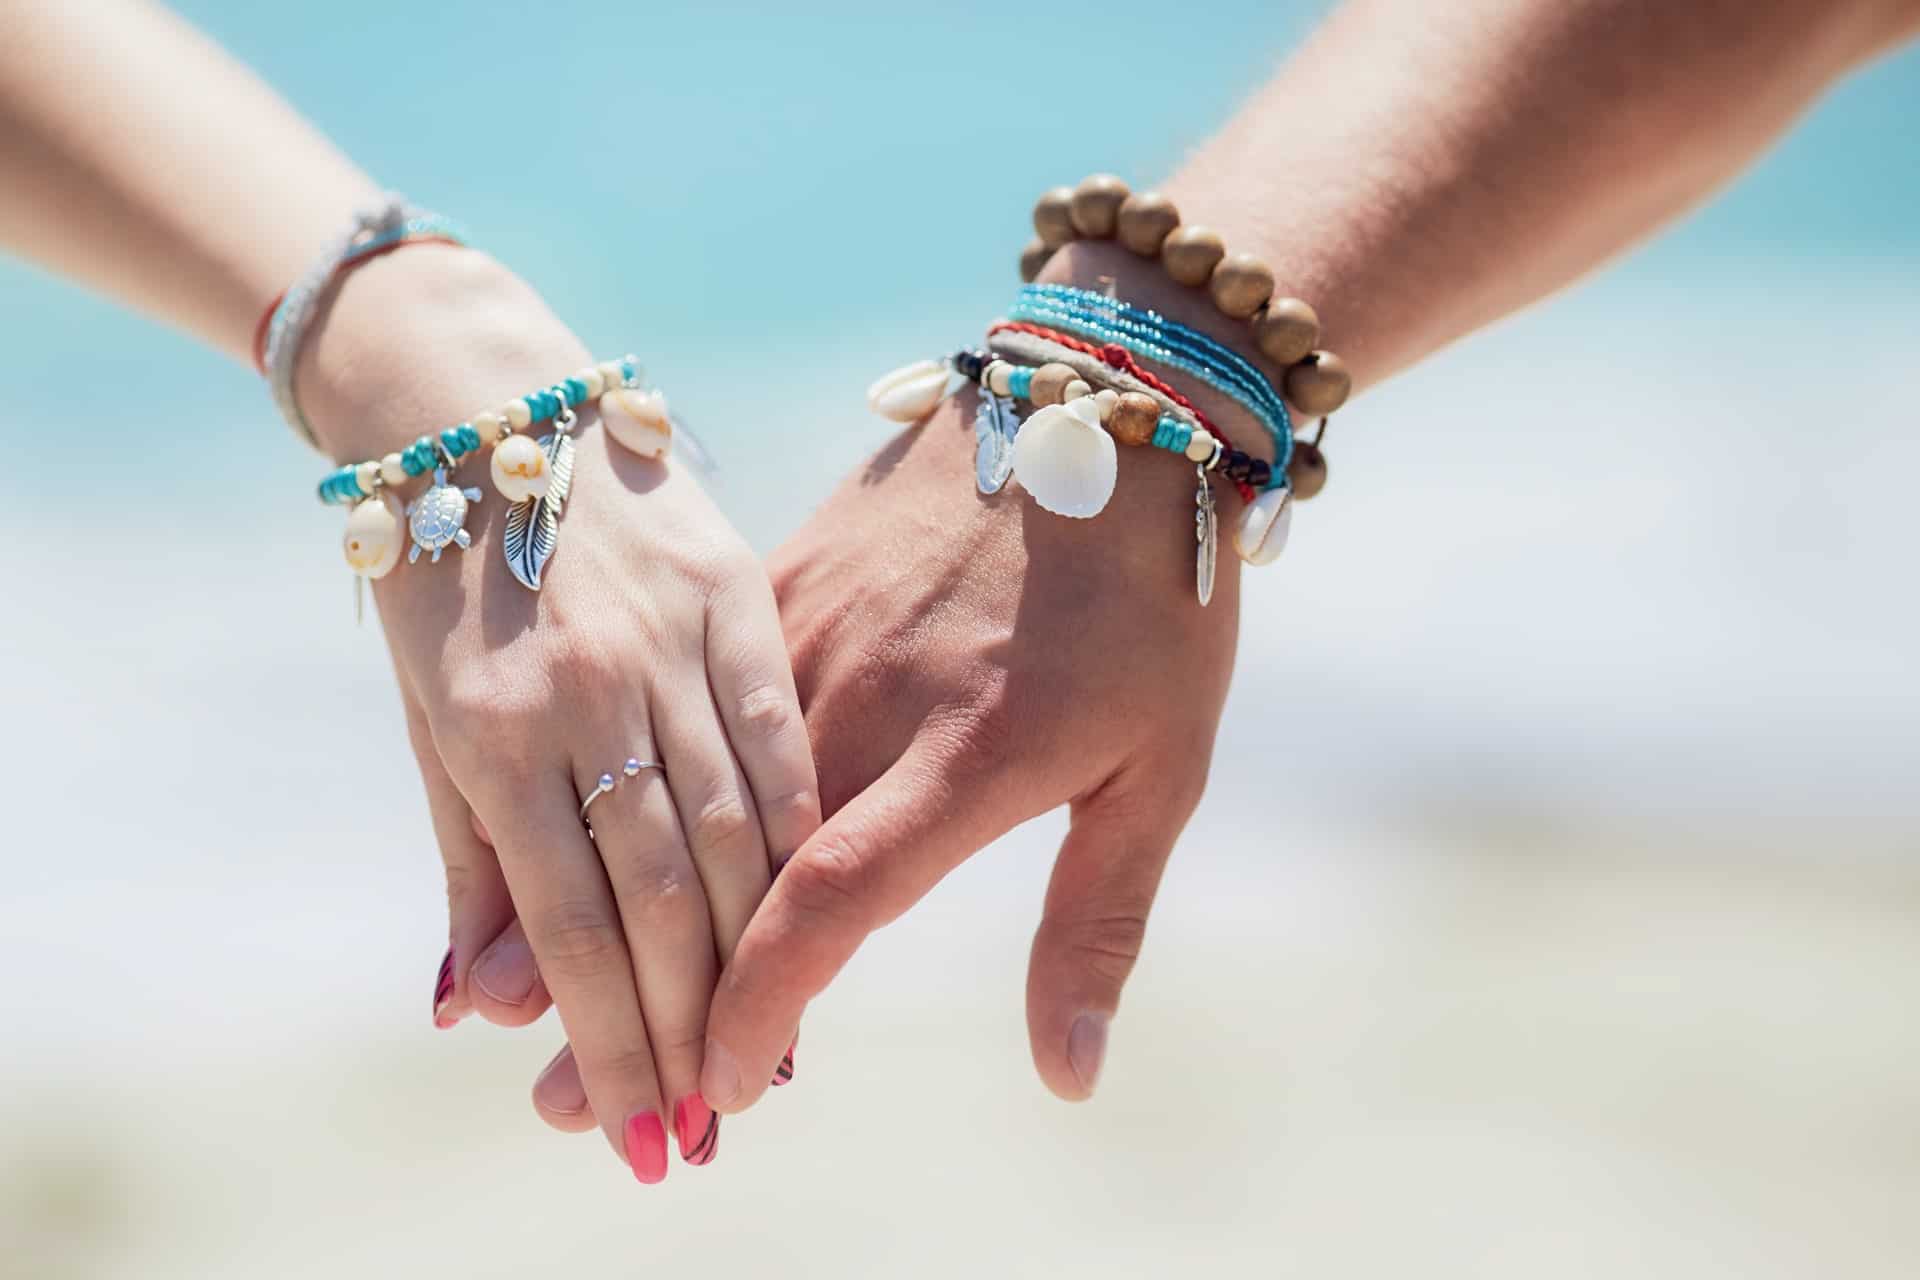 A man and woman wearing jewelry and holding hands